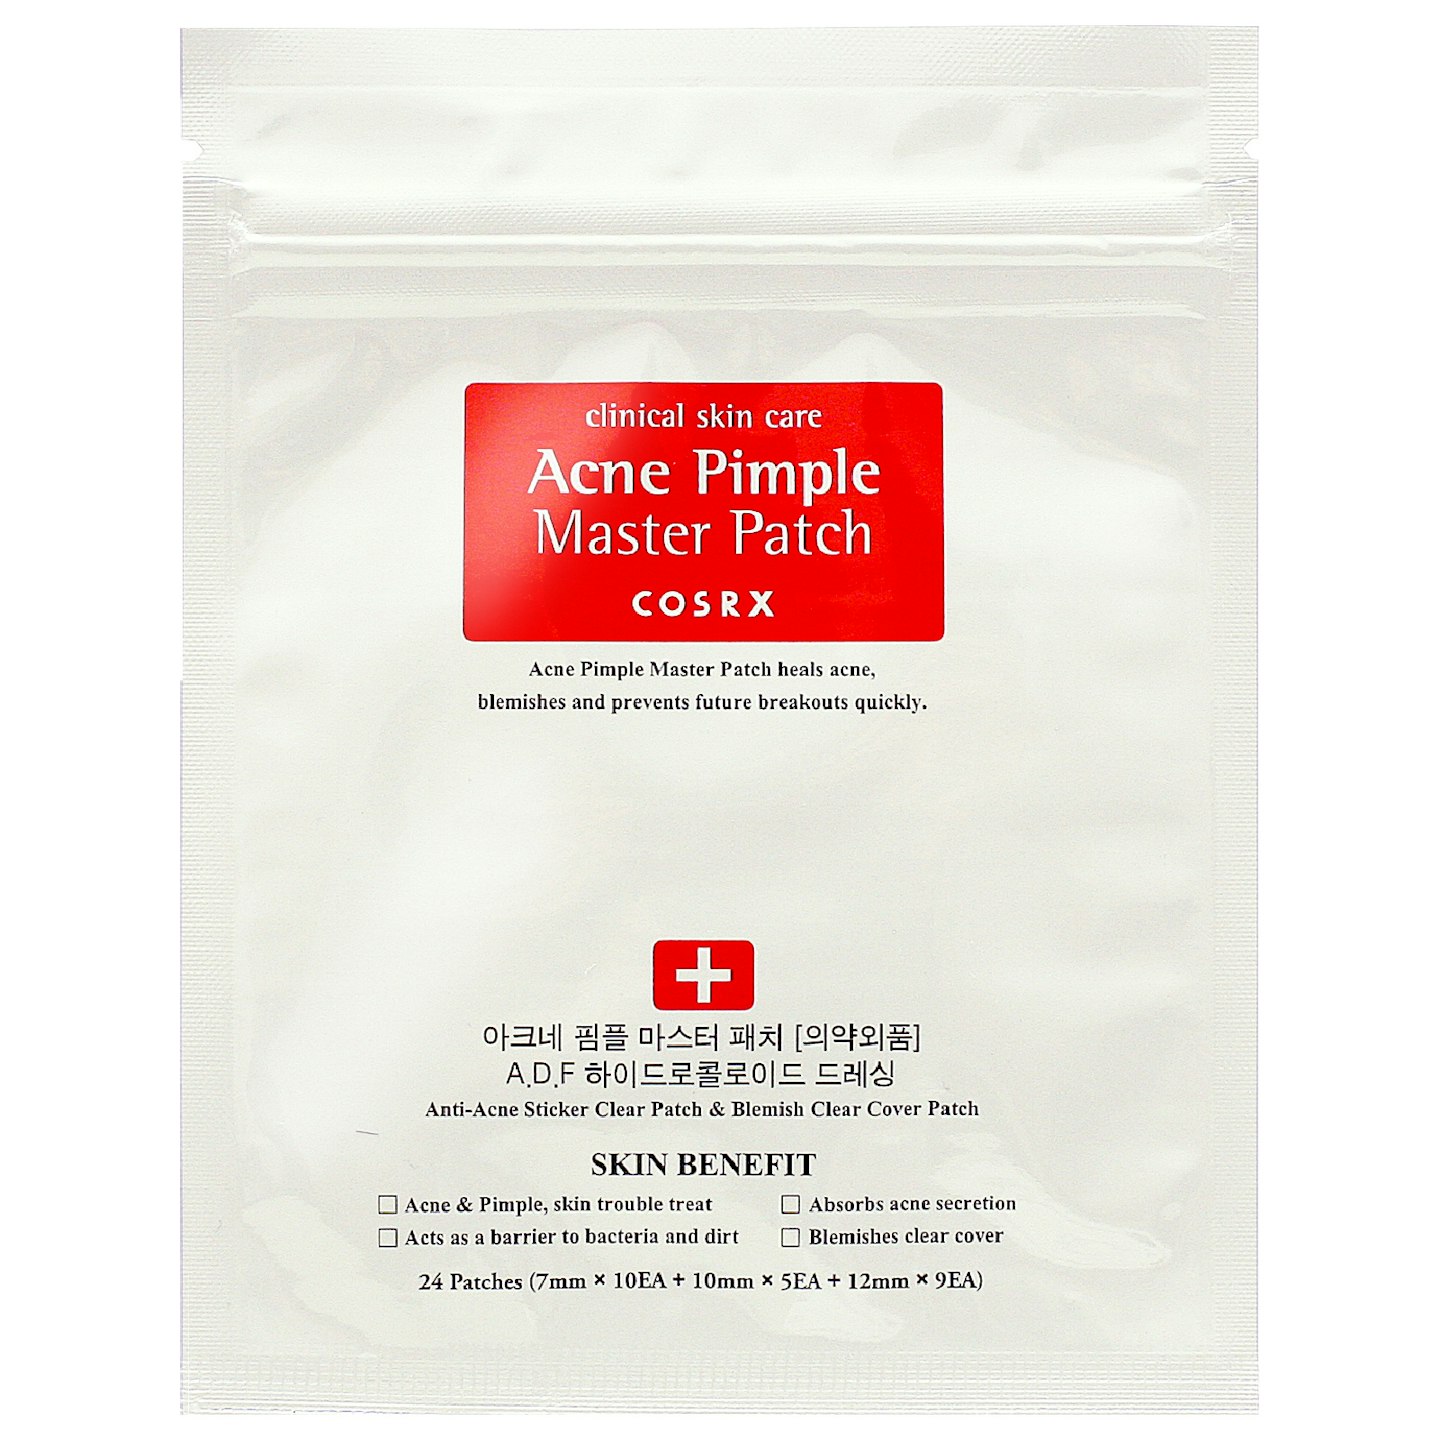 COSRX Acne Pimple Master Patch (24 Patches), £4.40